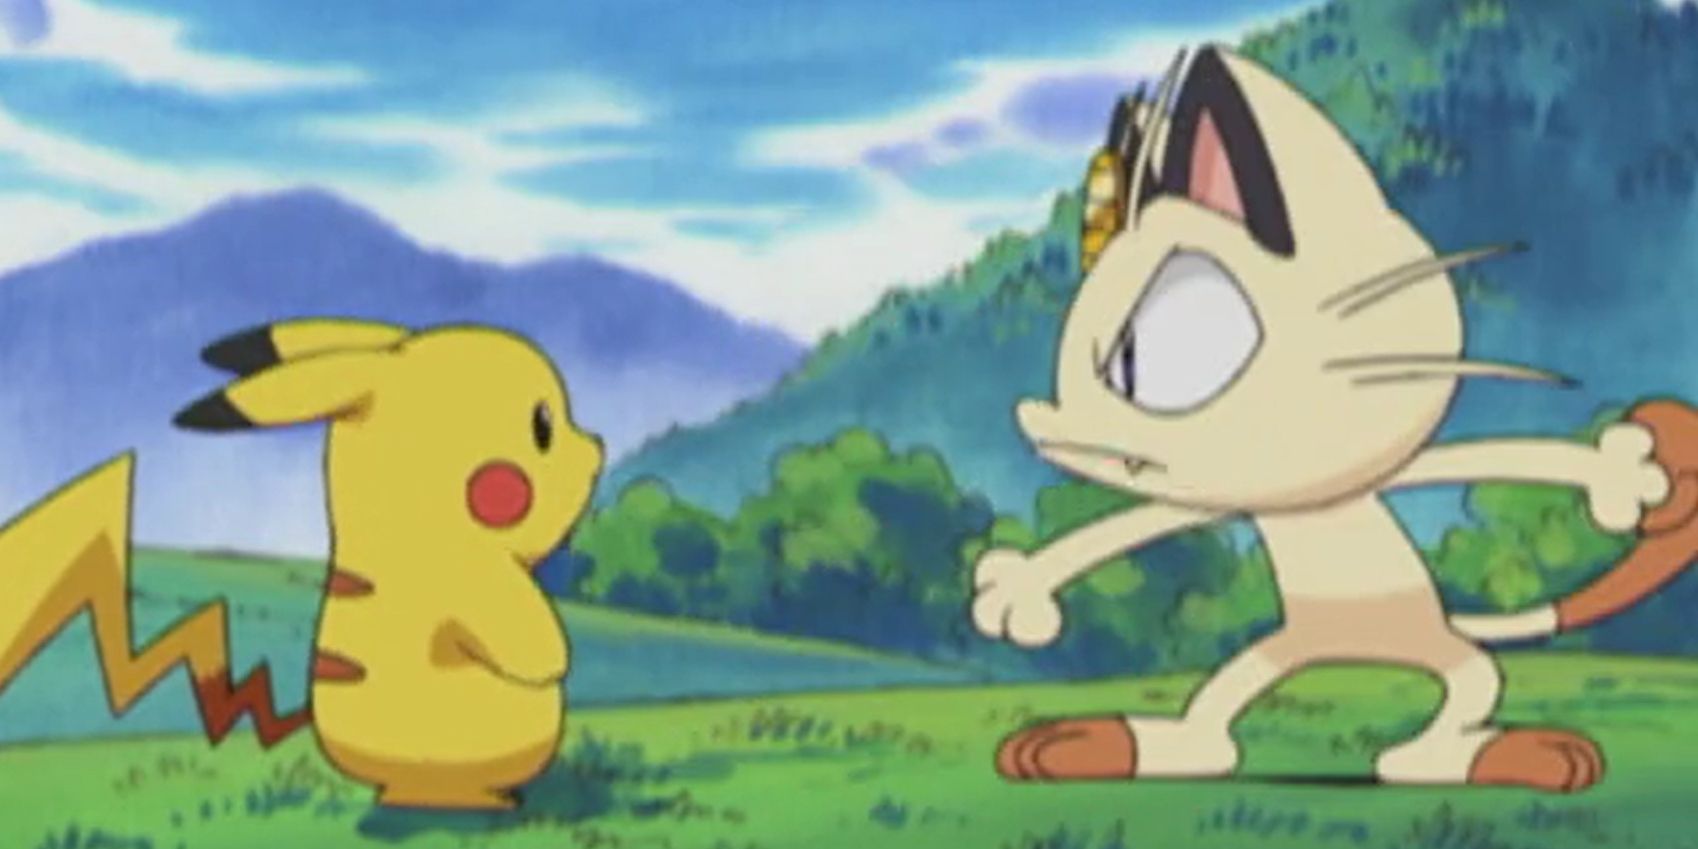 Pikachu and Meowth in Pokemon.